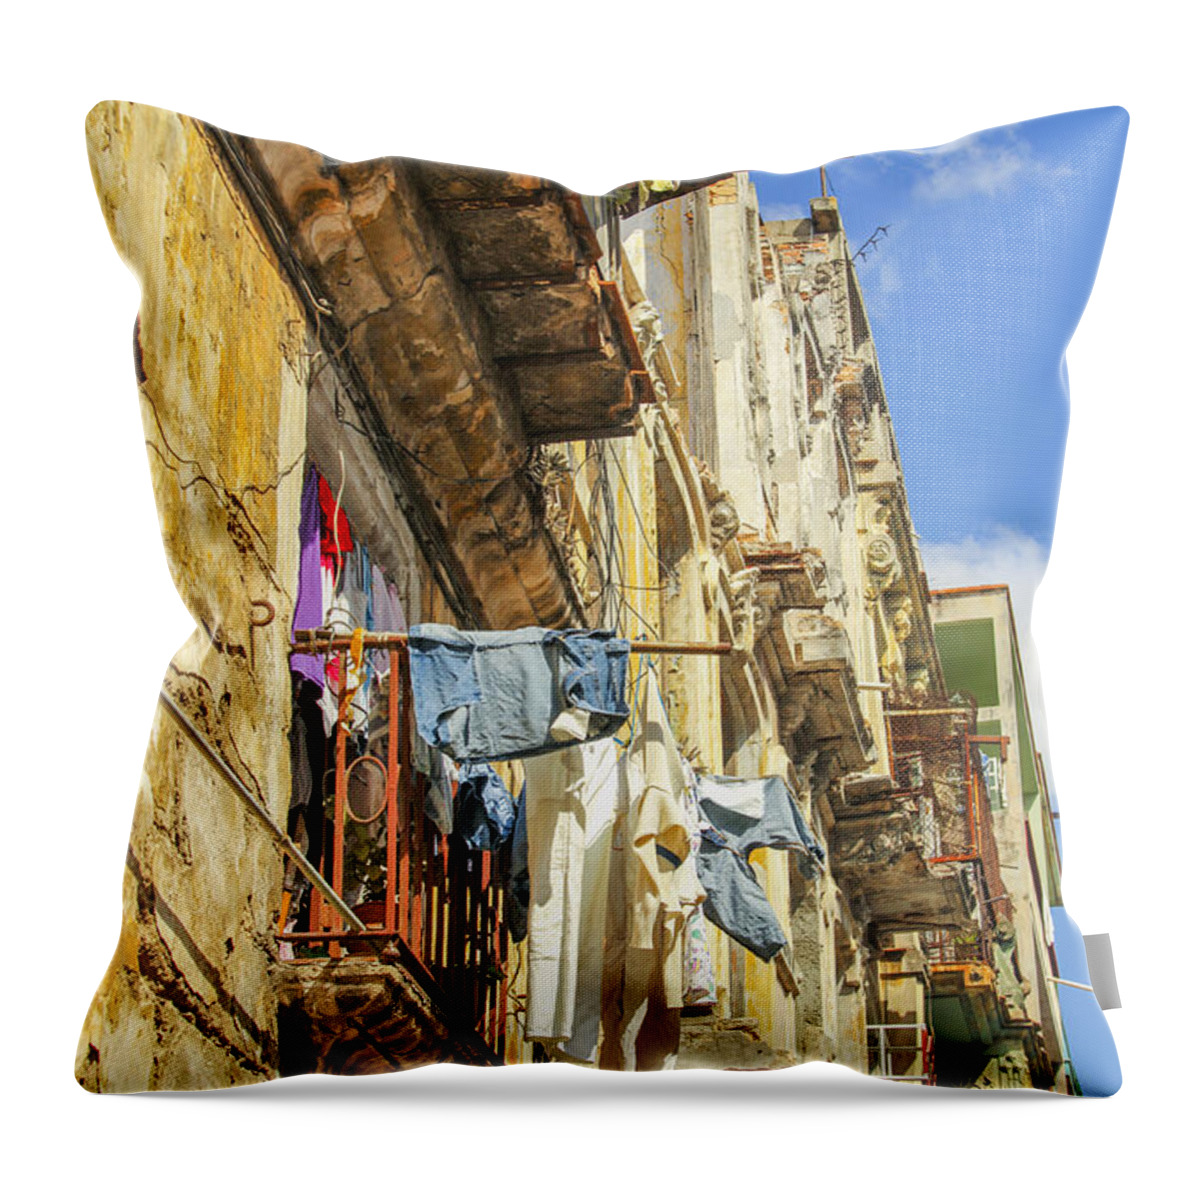 Antique Throw Pillow featuring the photograph Laundry drying in Havana by Patricia Hofmeester